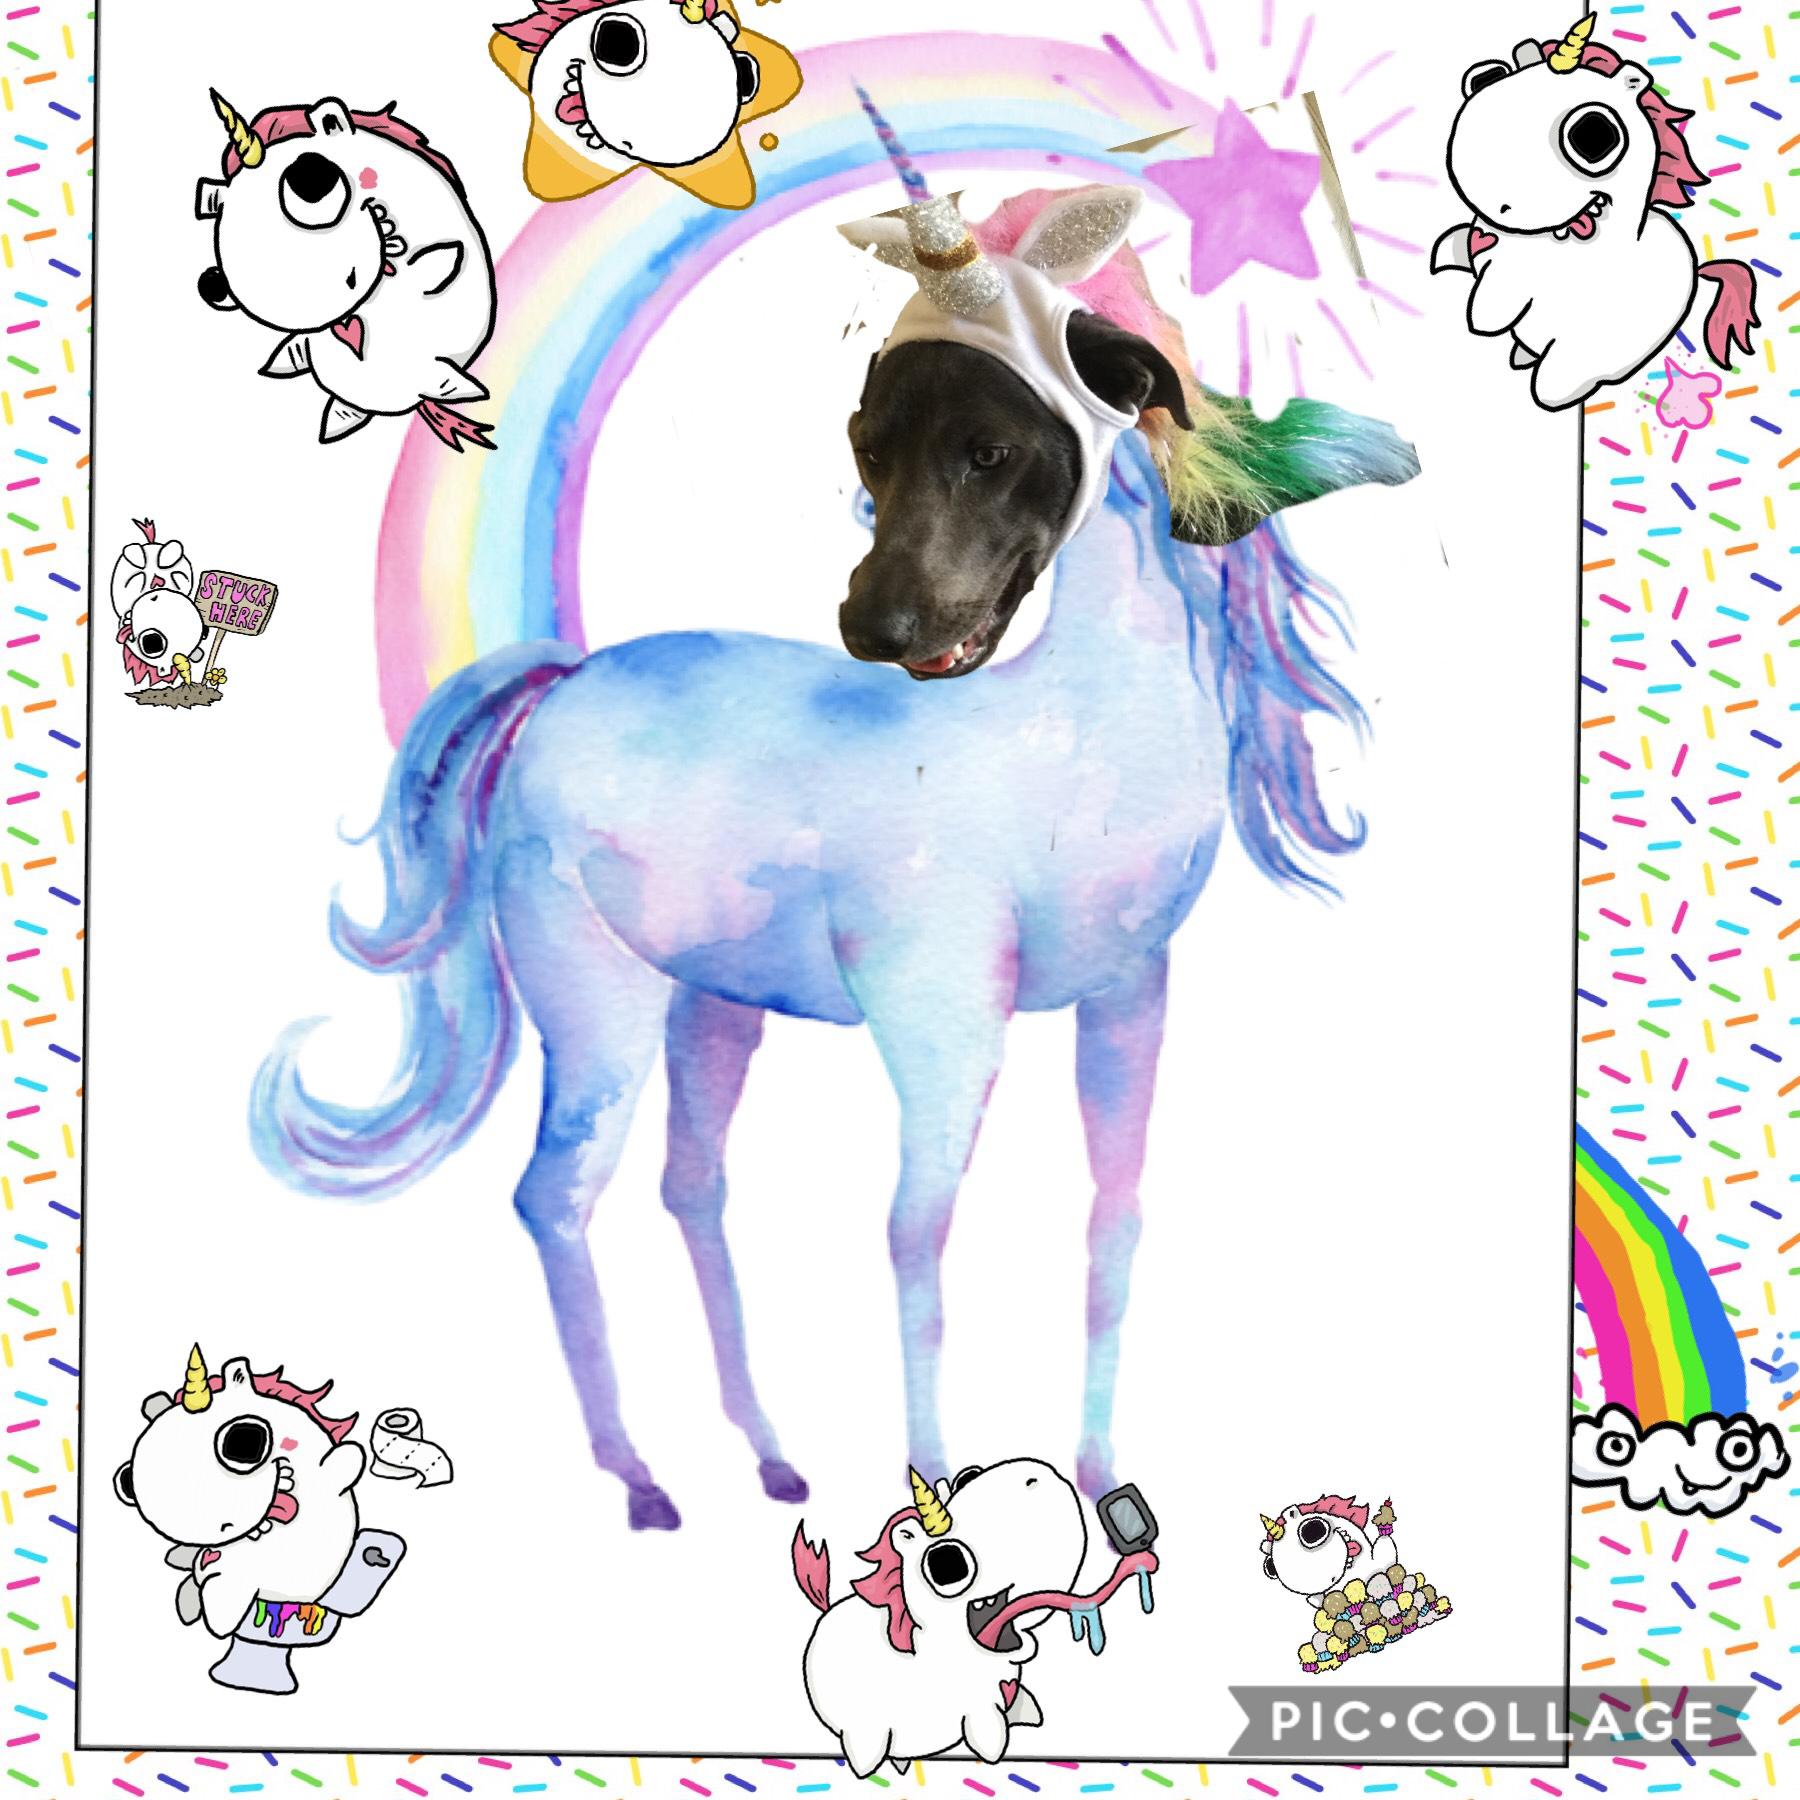 This is my dog as a unicorn